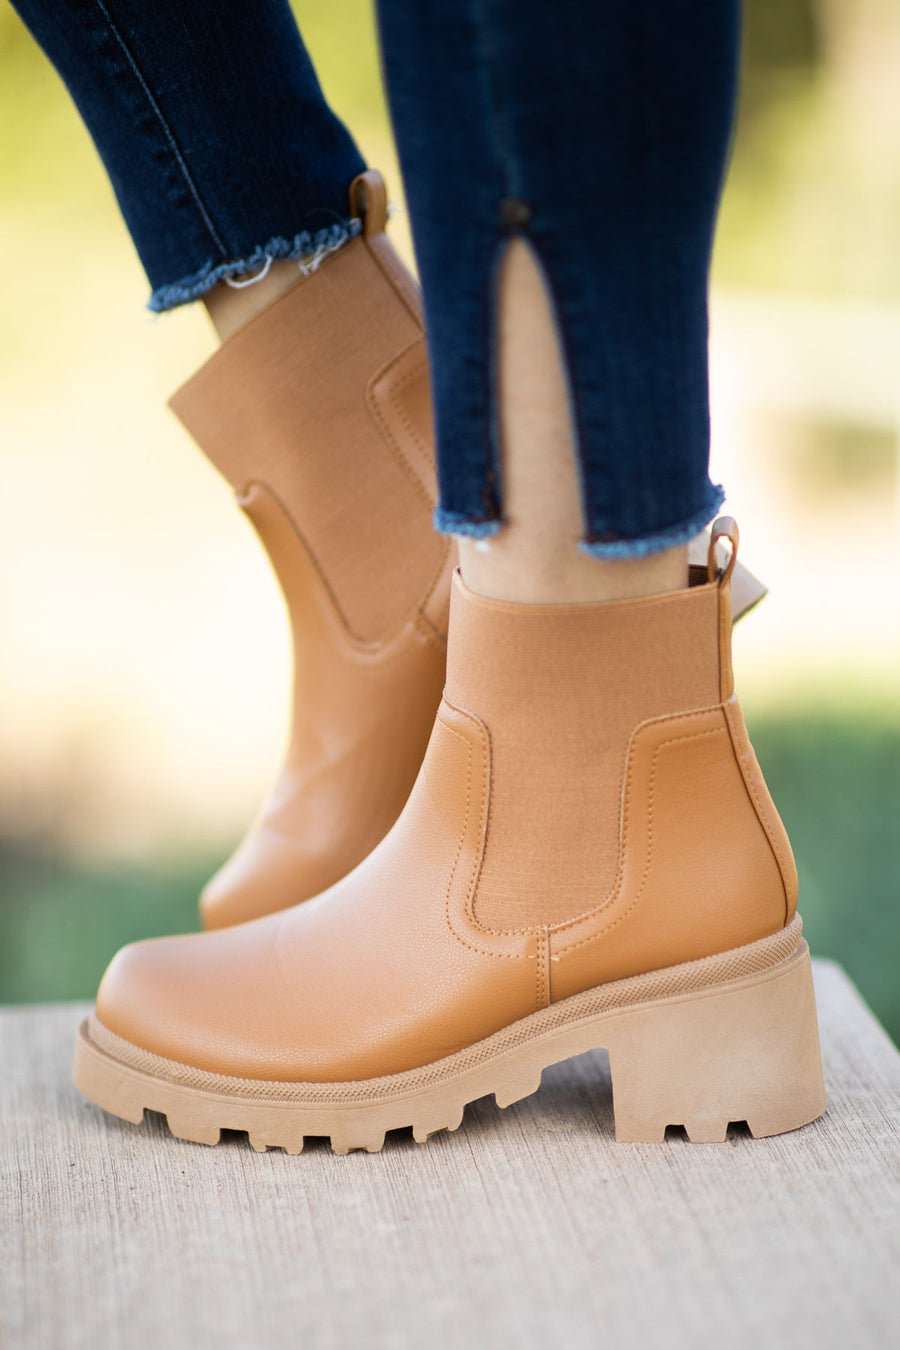 Camel and Tan Lug Sole Booties - Filly Flair